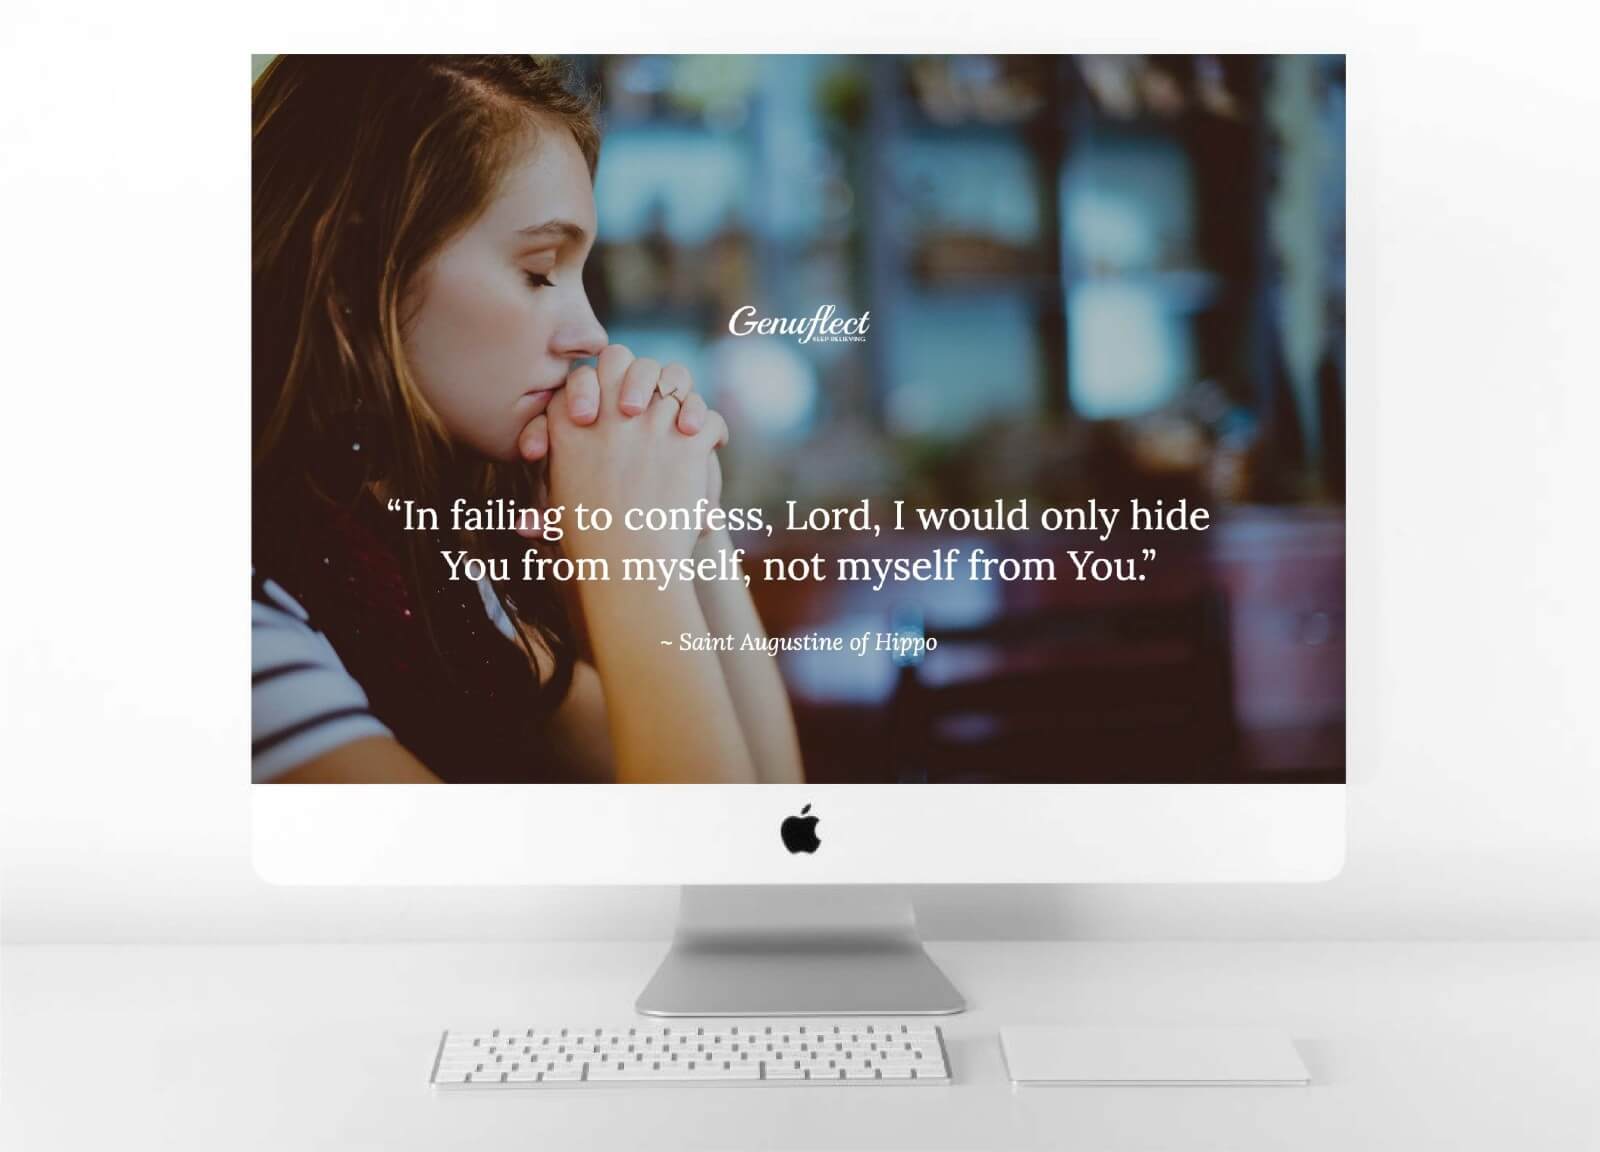 Genuflect computer background image of a Woman with eyes closed, head bent, and hands folded in prayer